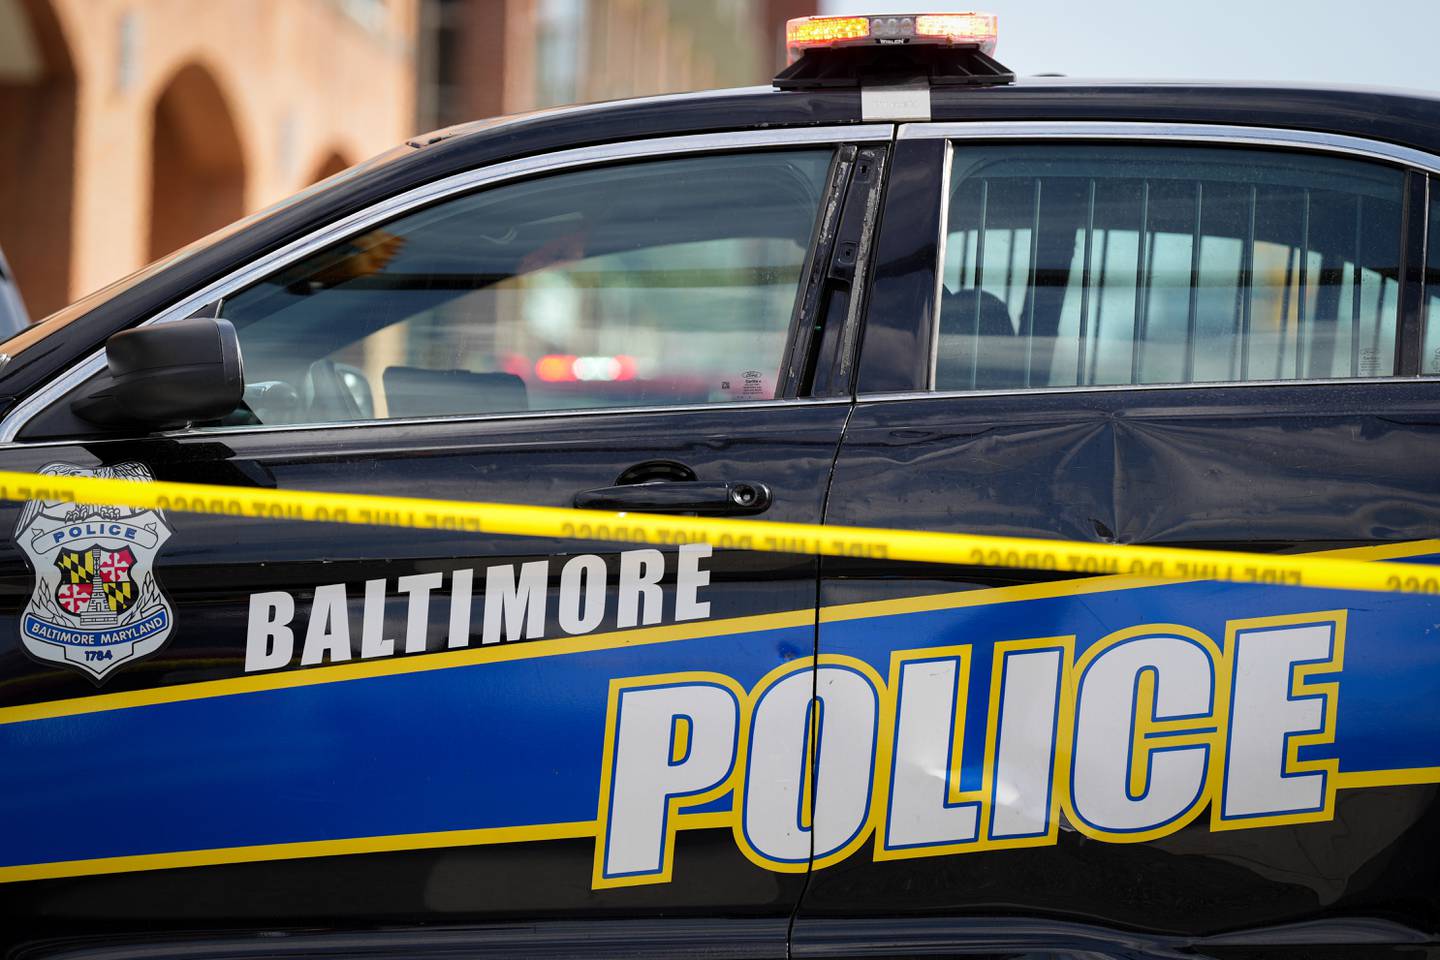 A Baltimore Police car and crime scene tape remains on the scene after a vehicle exploded inside a five-story parking garage in Baltimore’s Fells Point neighborhood on 7/27/22.  Two people are being treated for injuries, fire officials said Wednesday afternoon.